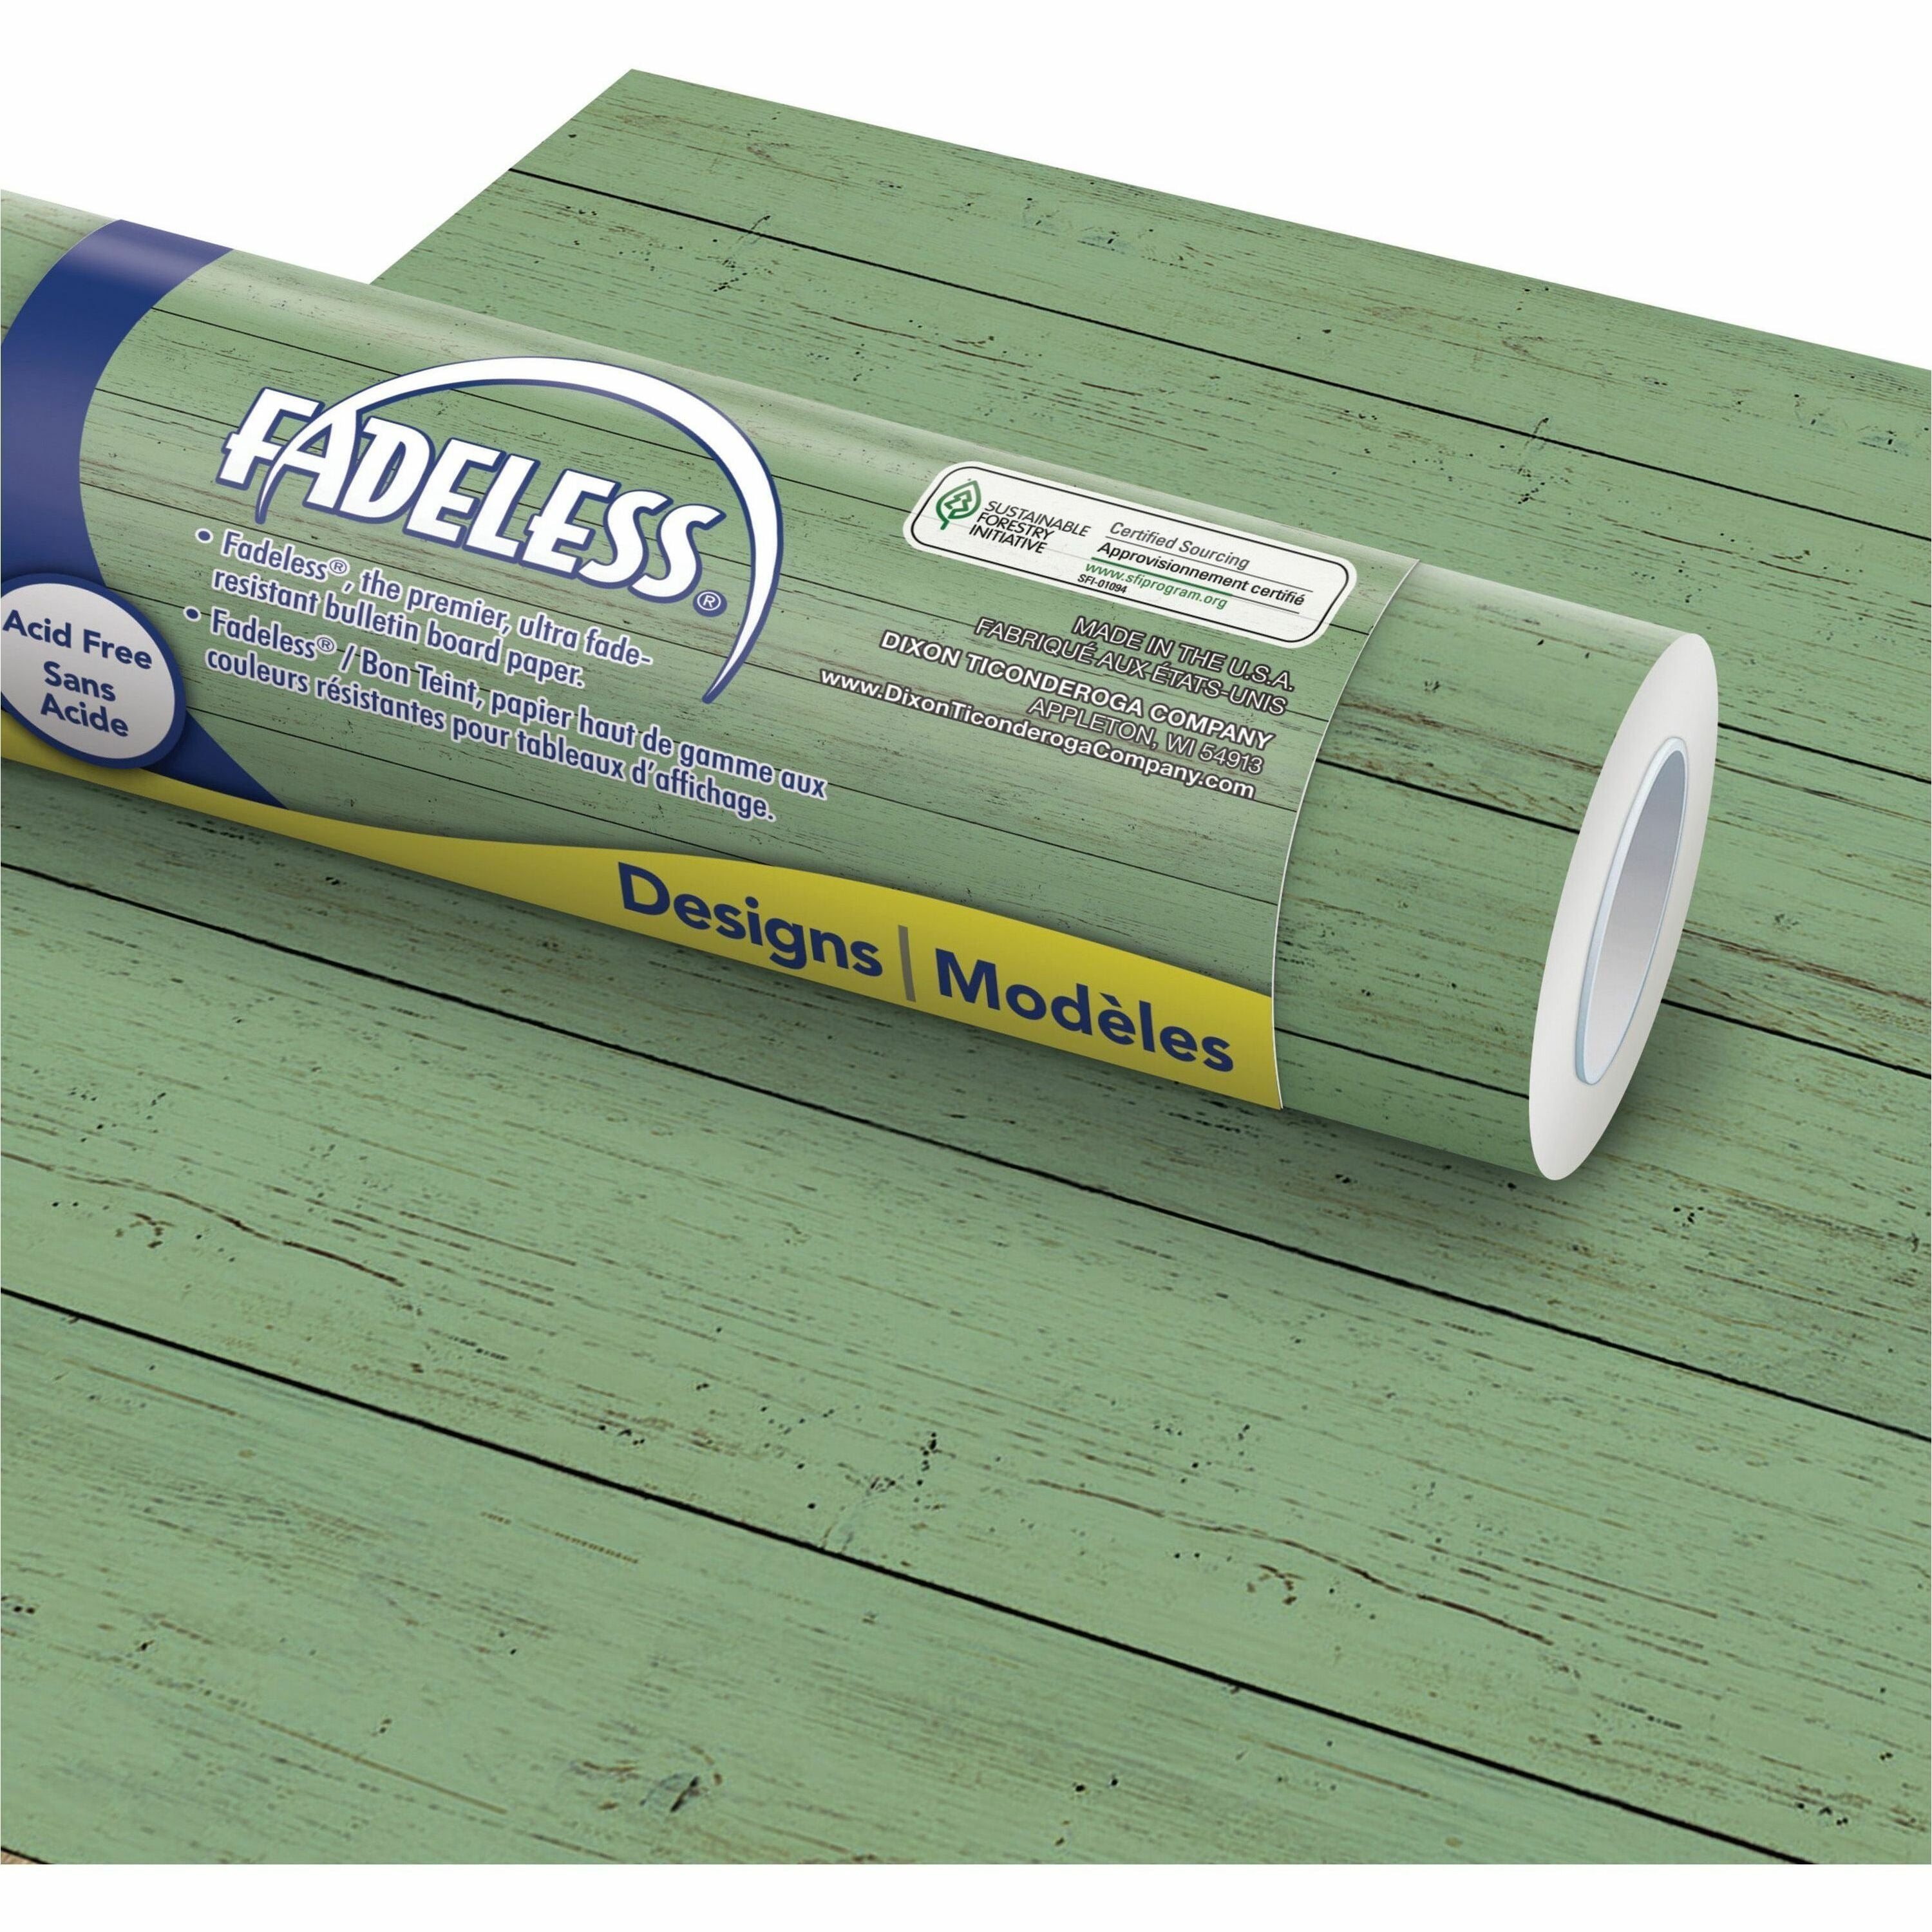 fadeless-designs-paper-roll-art-project-craft-project-classroom-display-table-skirting-decoration-bulletin-board-48width-x-50length-1-roll-green_pacp57075 - 1